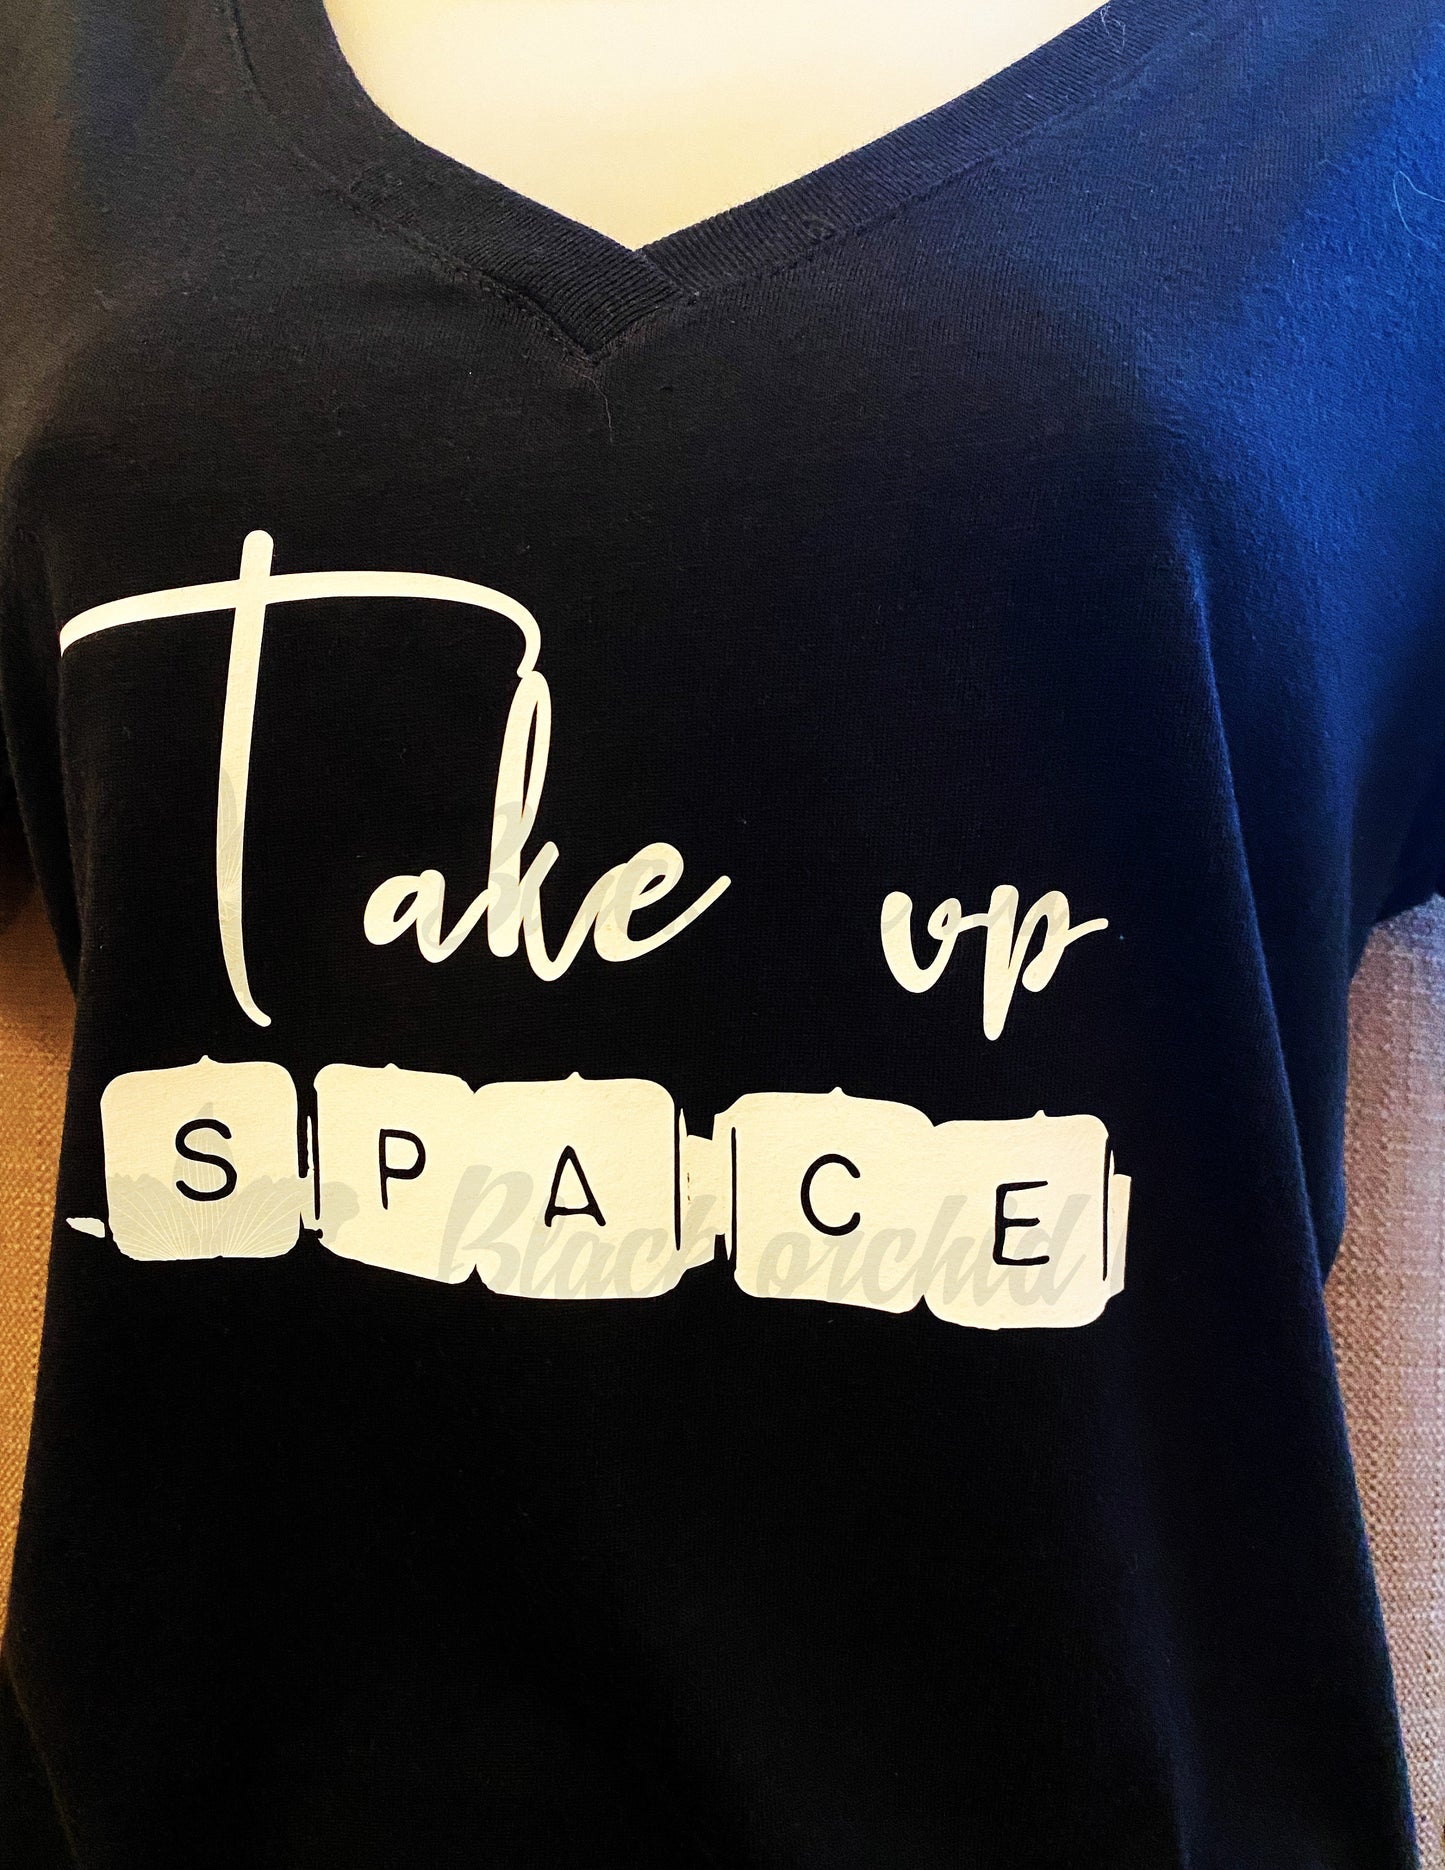 Take up Space T-shirt, Tank, Hoodie, or Tote, Women’s Empowerment, Strong Woman, Feminist Shirt, women's rights